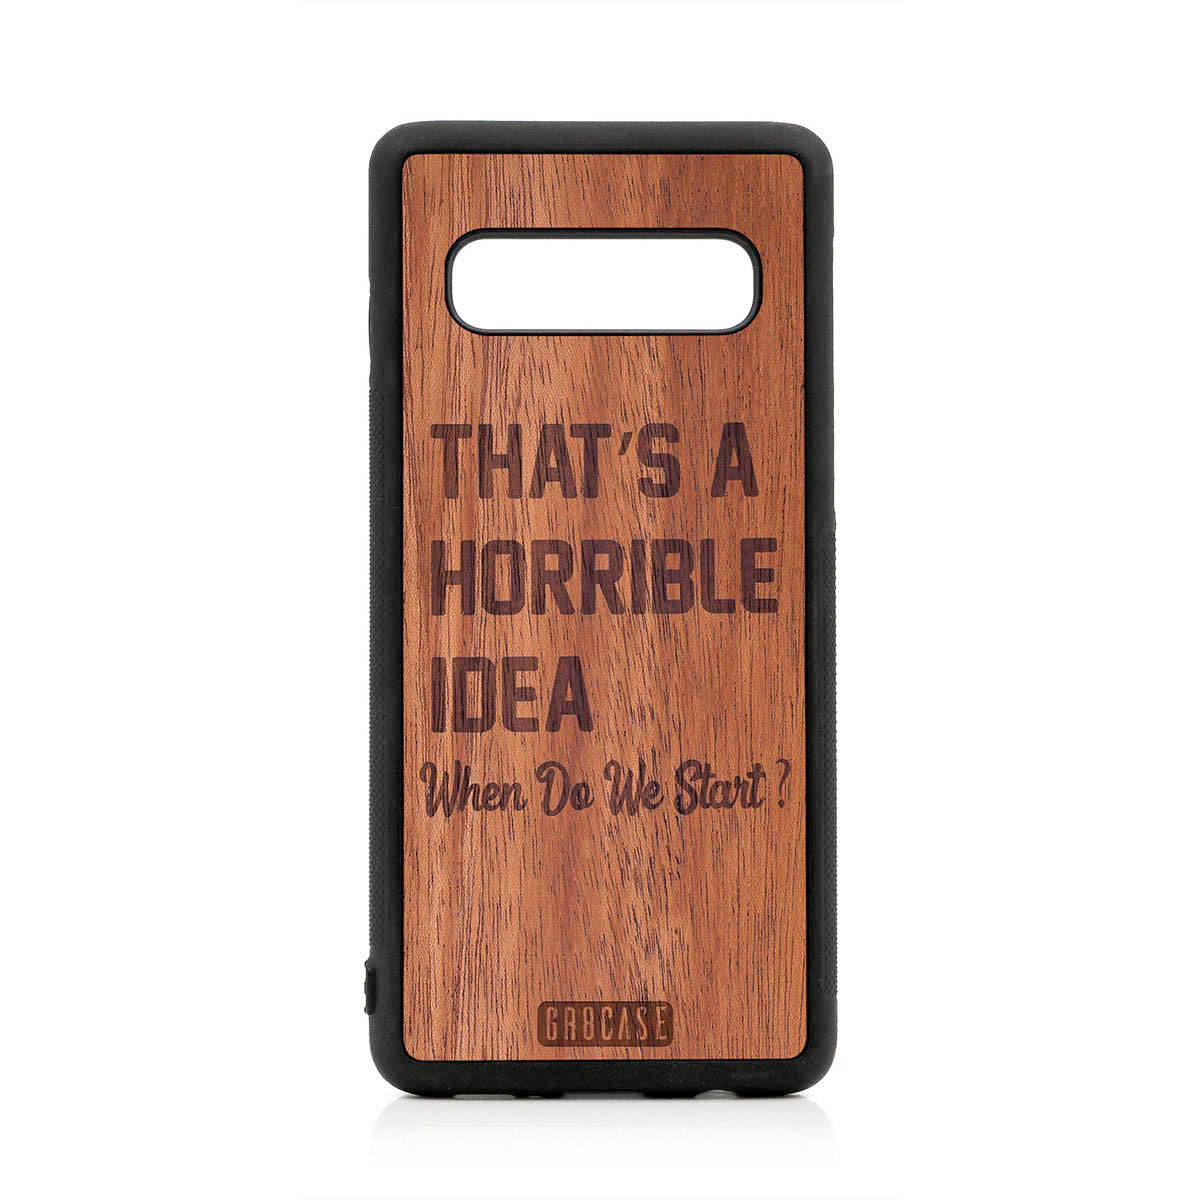 That's A Horrible idea When Do We Start? Design Wood Case For Samsung Galaxy S10